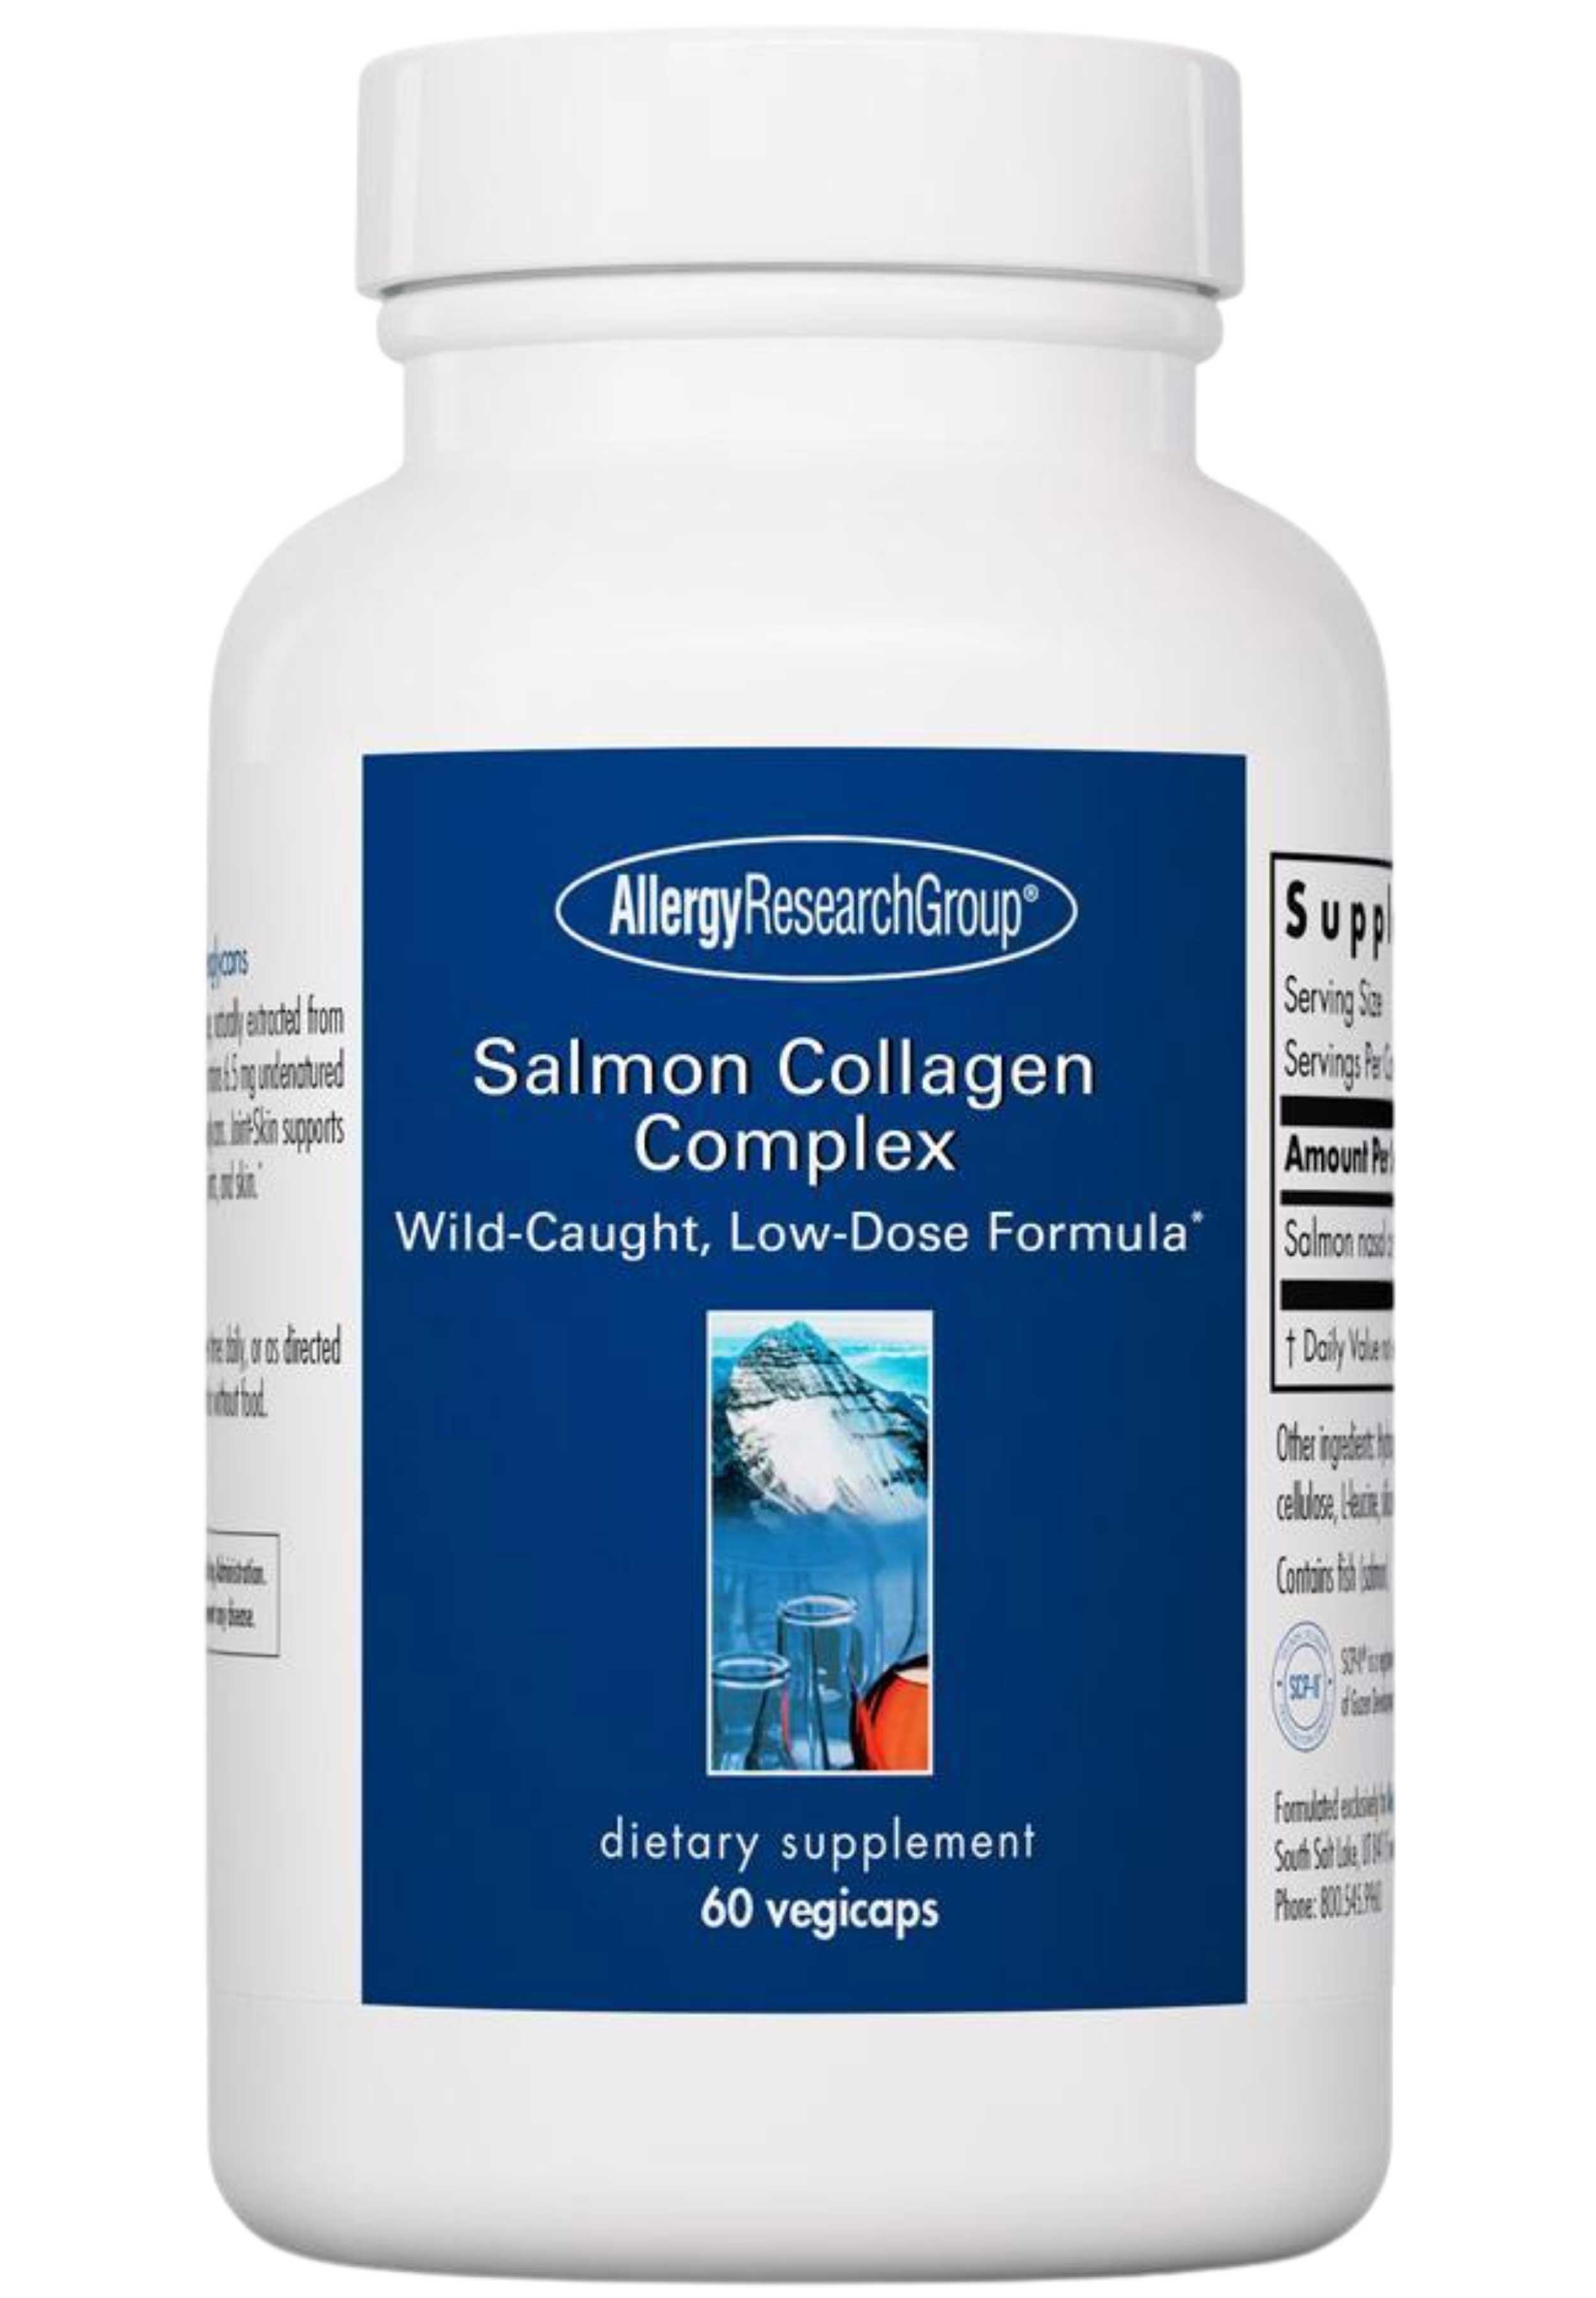 Allergy Research Group Salmon Collagen Complex